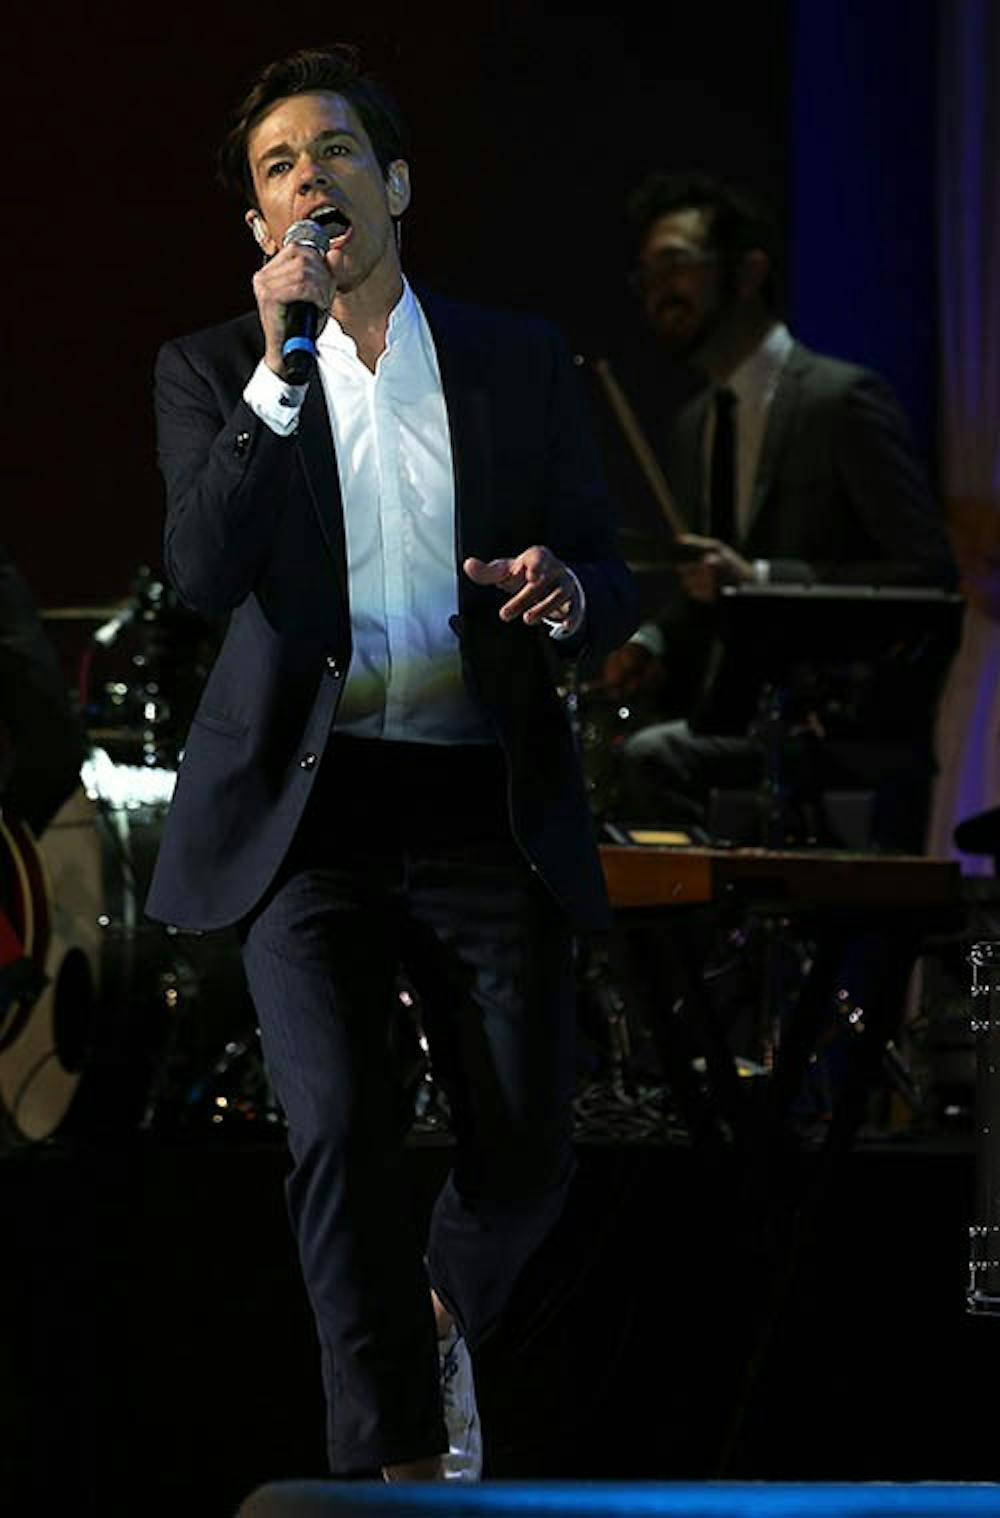 Nate Ruess of the band Fun. performs during the Inaugural Ball on Monday in Washington, D.C. Fun. will perform at Ball State on Friday, and ticket sales open for the general public today. MCT PHOTO